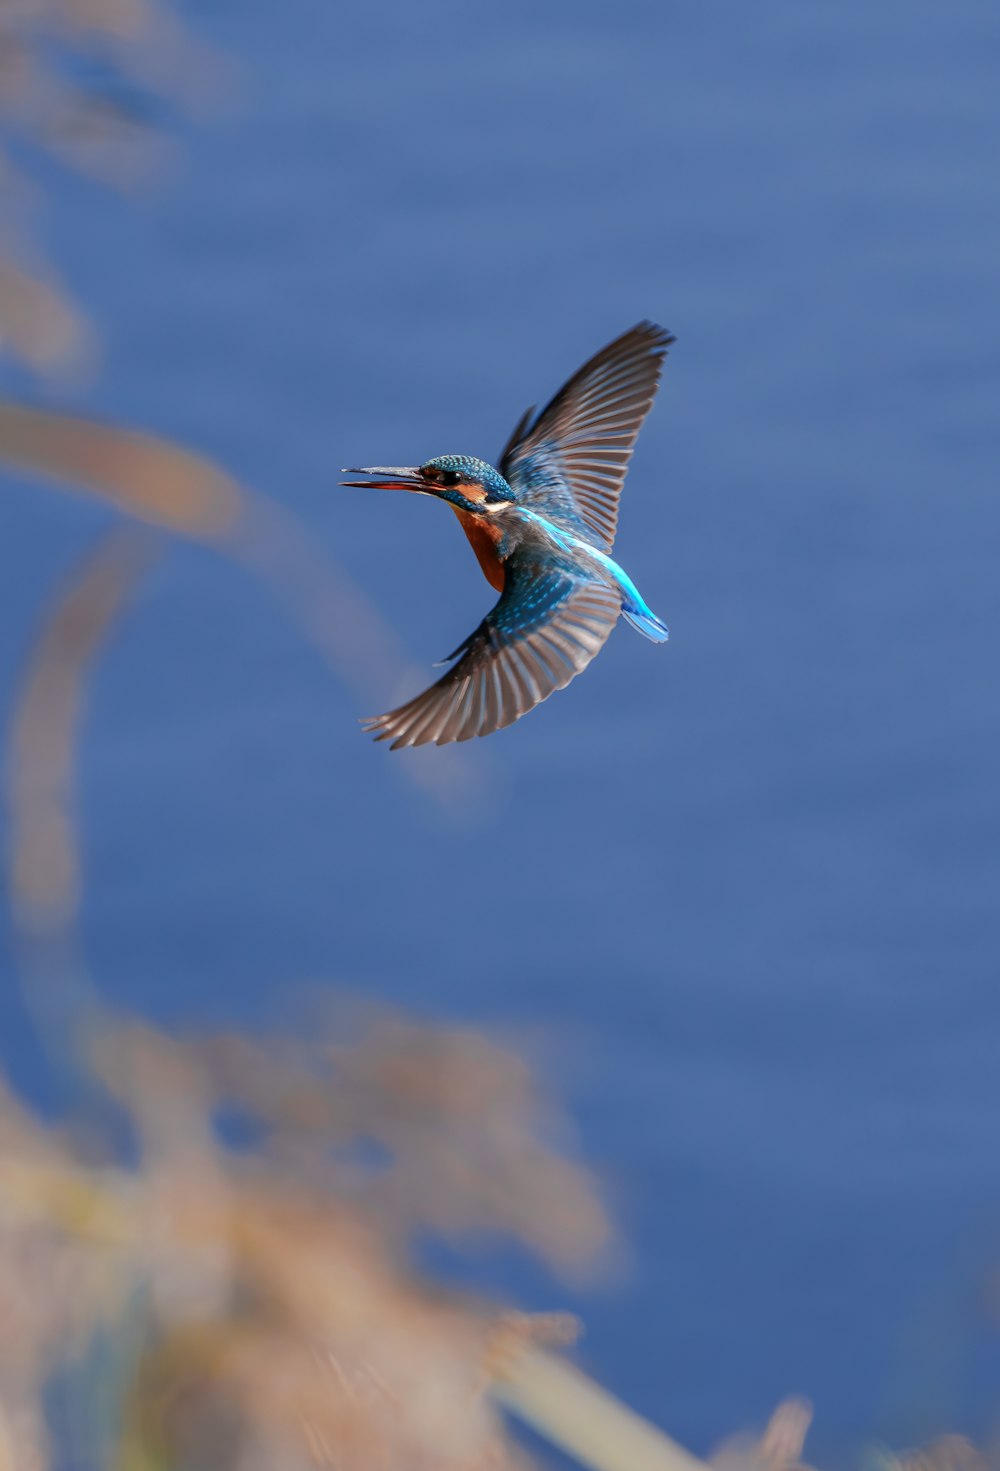 a small bird flying over a body of water